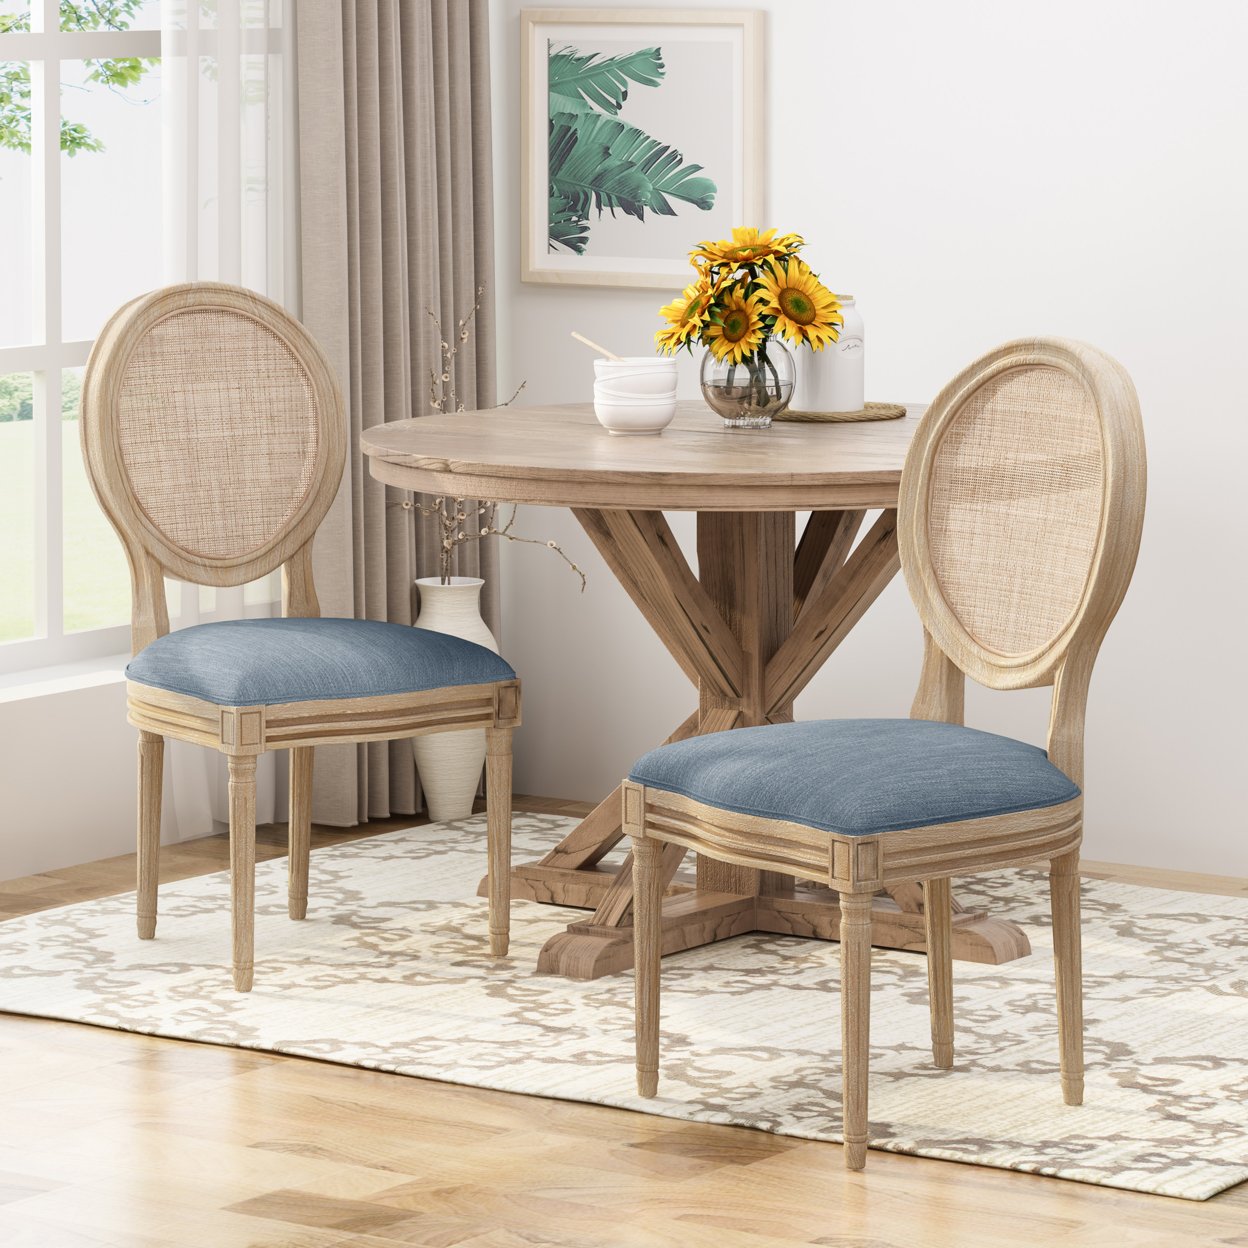 Camilo Wooden Dining Chair With Wicker And Fabric Seating (Set Of 2) - Light Blush + Natural